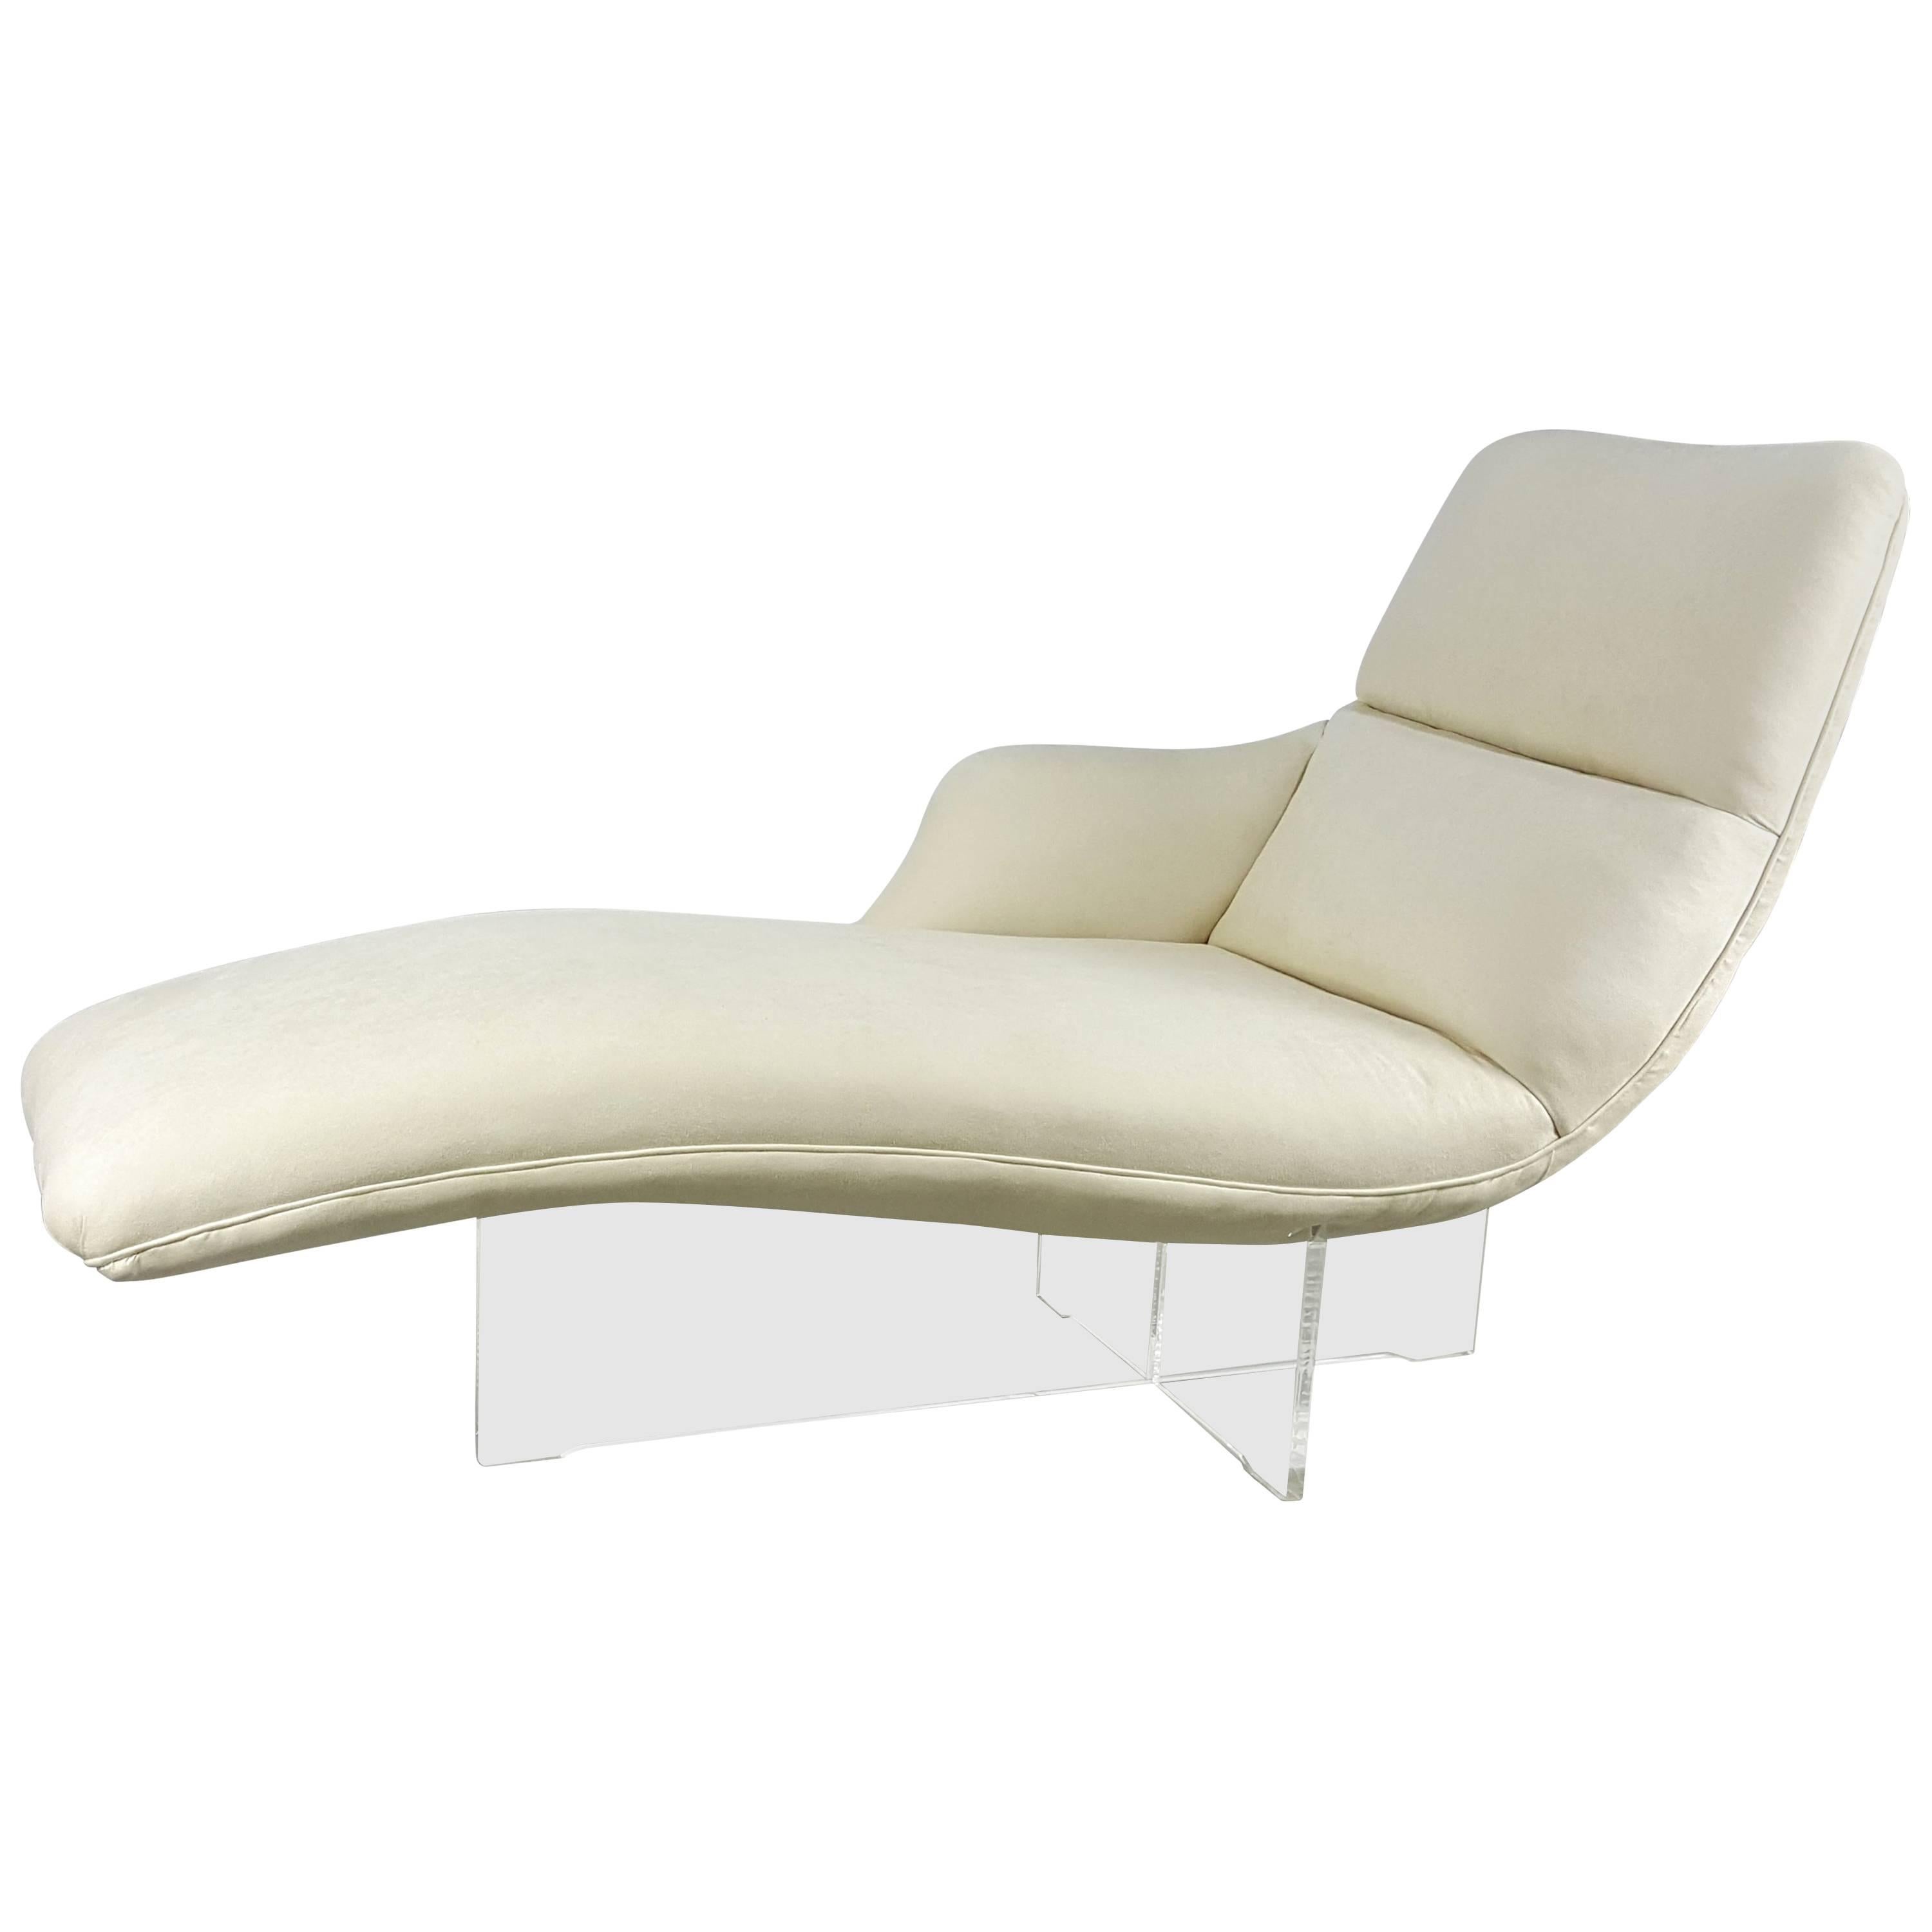 "Erica" Chaise Lounge by Vladimir Kagan in Creamy Ultrasuede, 1970s